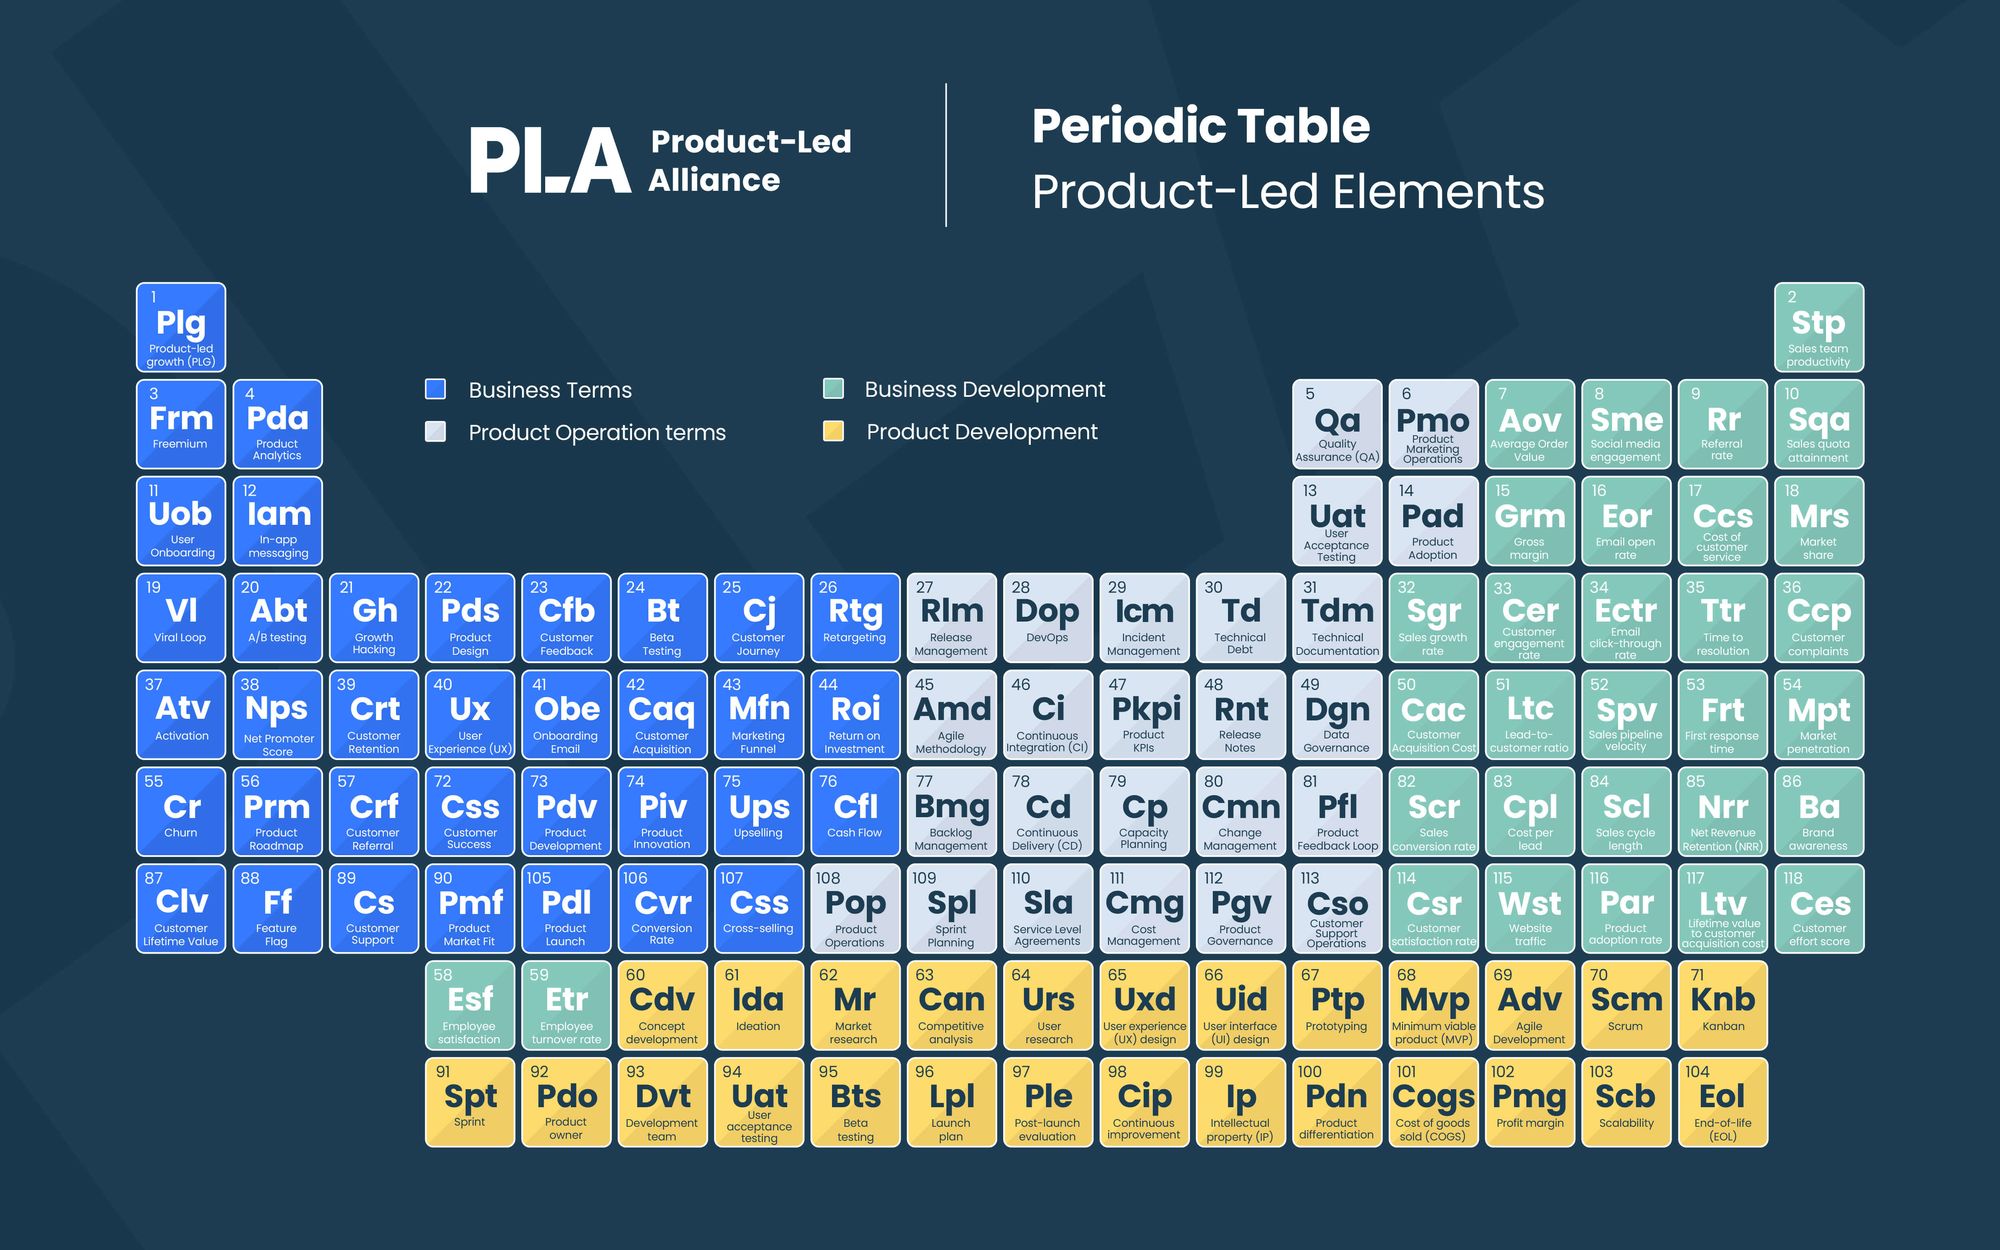 PLG periodic table of elements